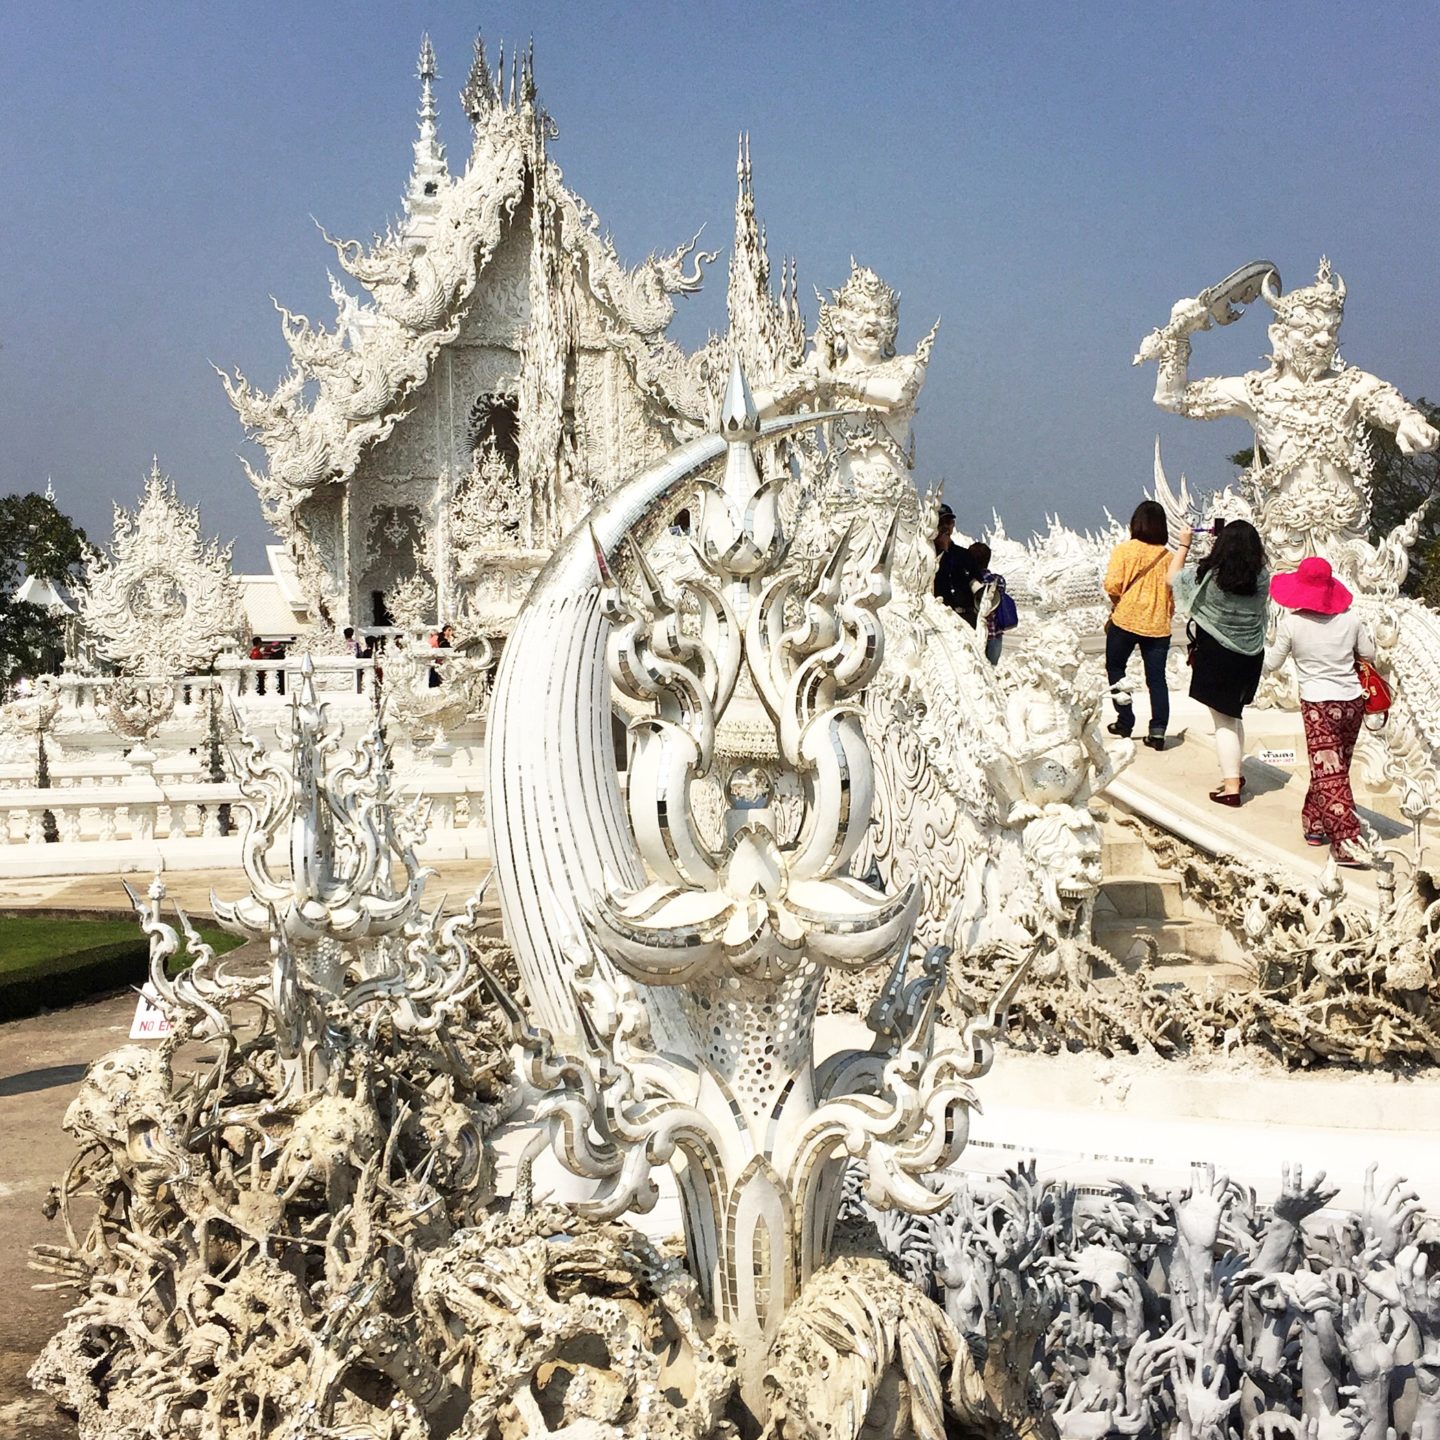 Chiang Rai: the White Temple & the Golden Triangle